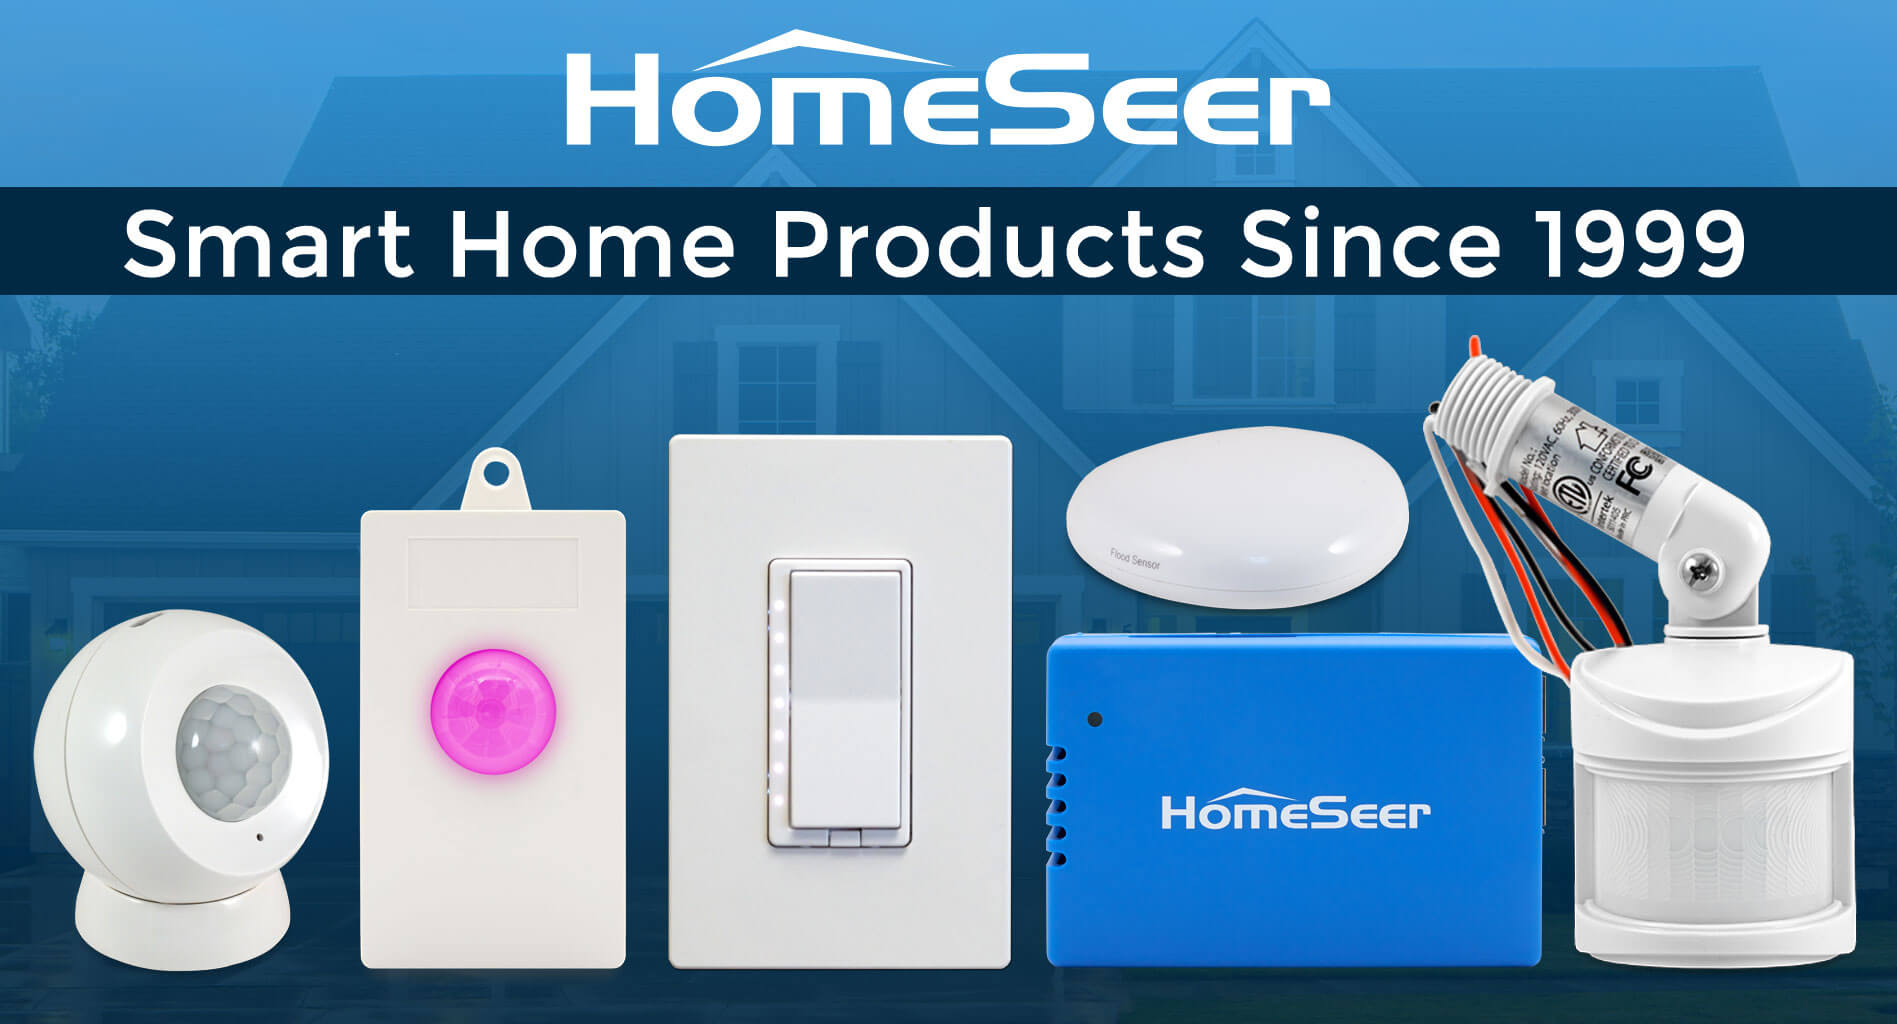 HomeSeer works with Home Assistant